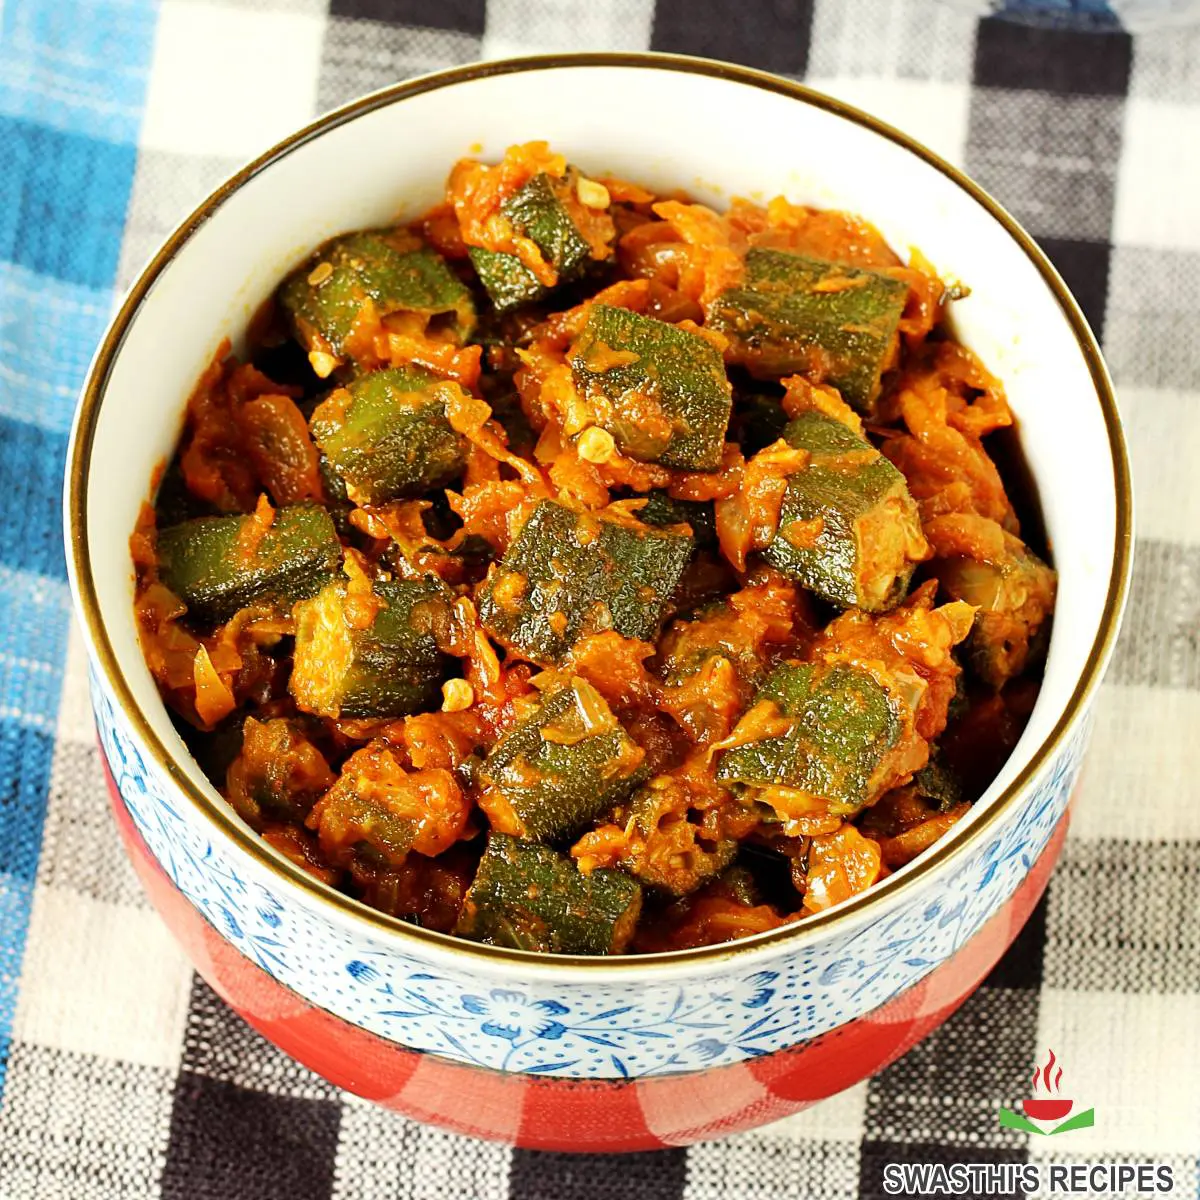 Bhindi masala made with okra, spices and herbs